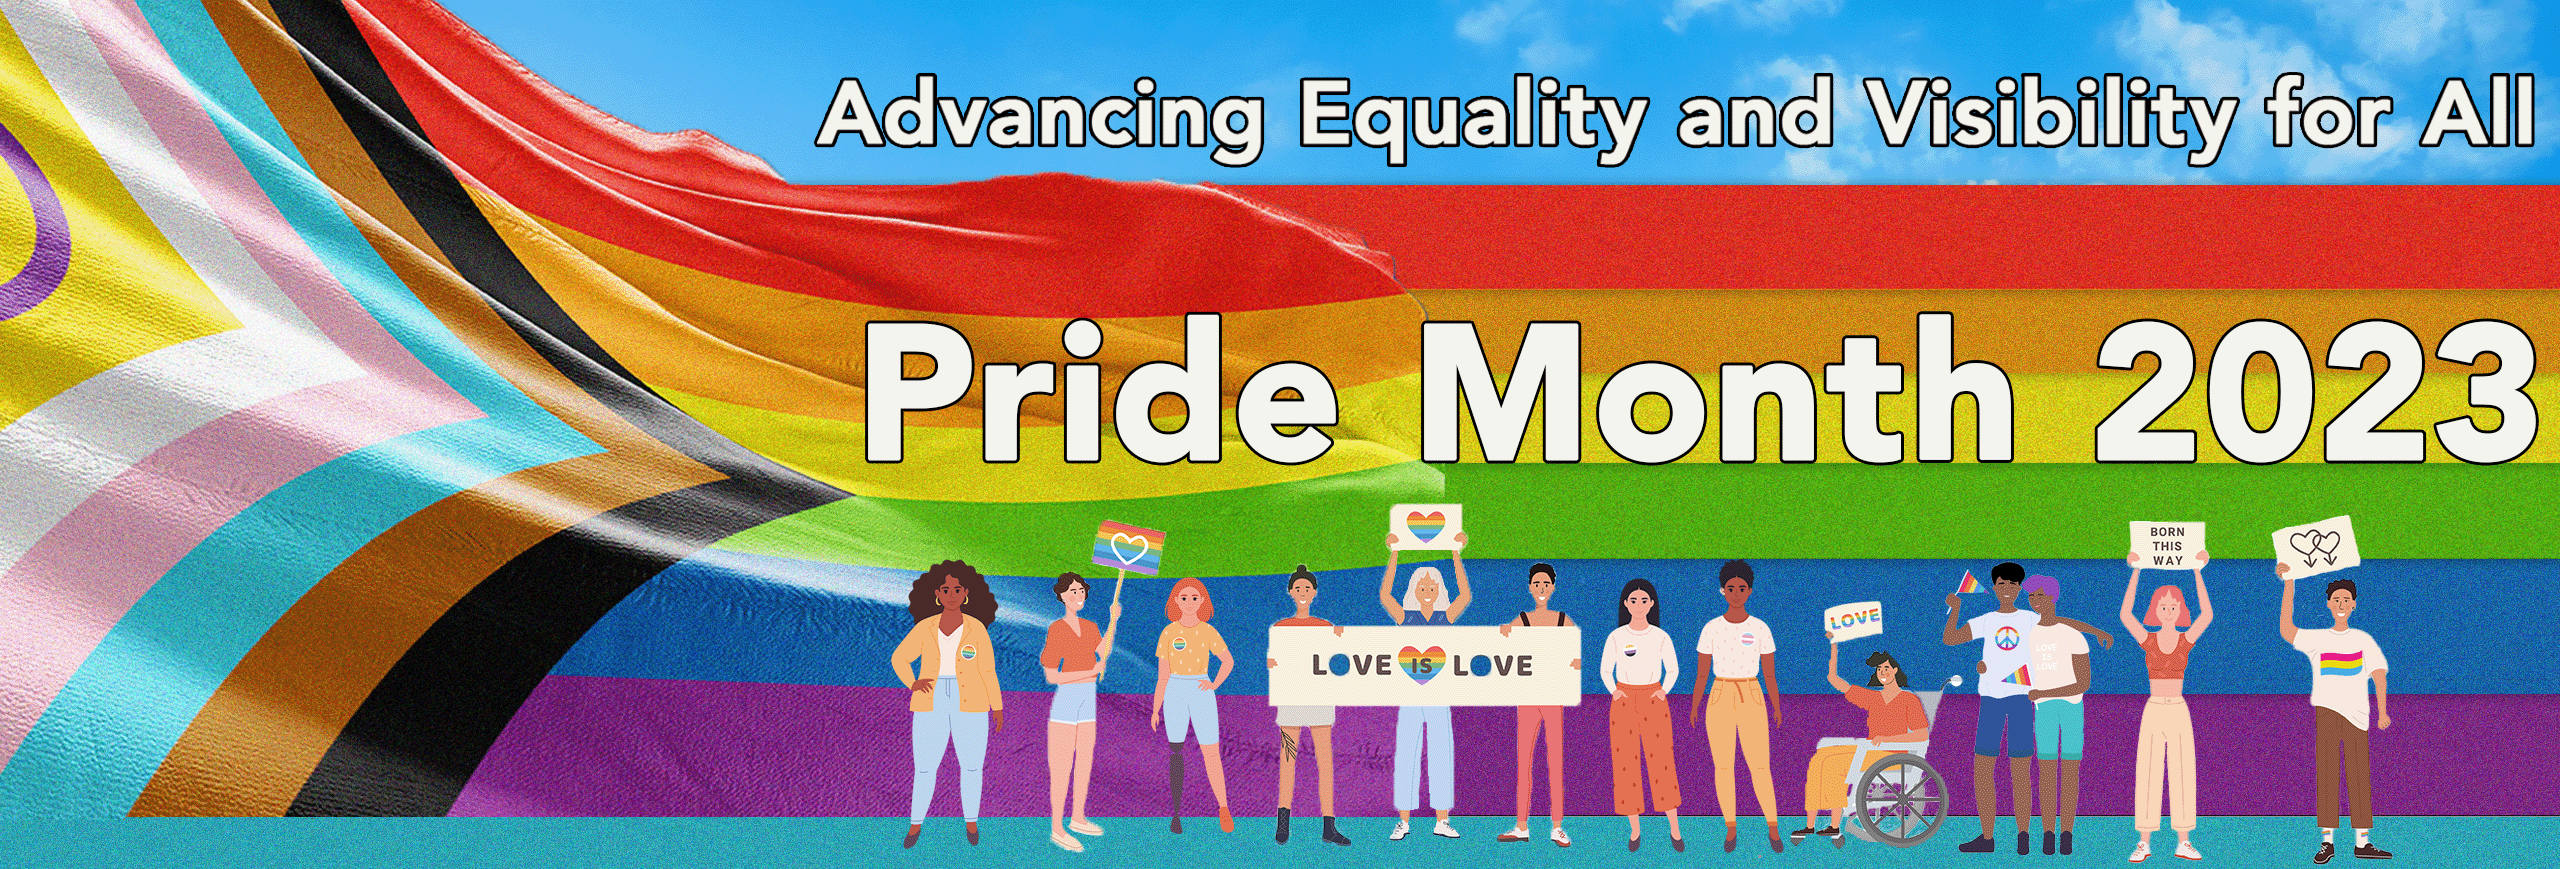 Hero Image: A graphic of the Pride Month 2023 campaign with the Intersex-Inclusive Progress flag and vector images of diverse individuals holding signs and flags.